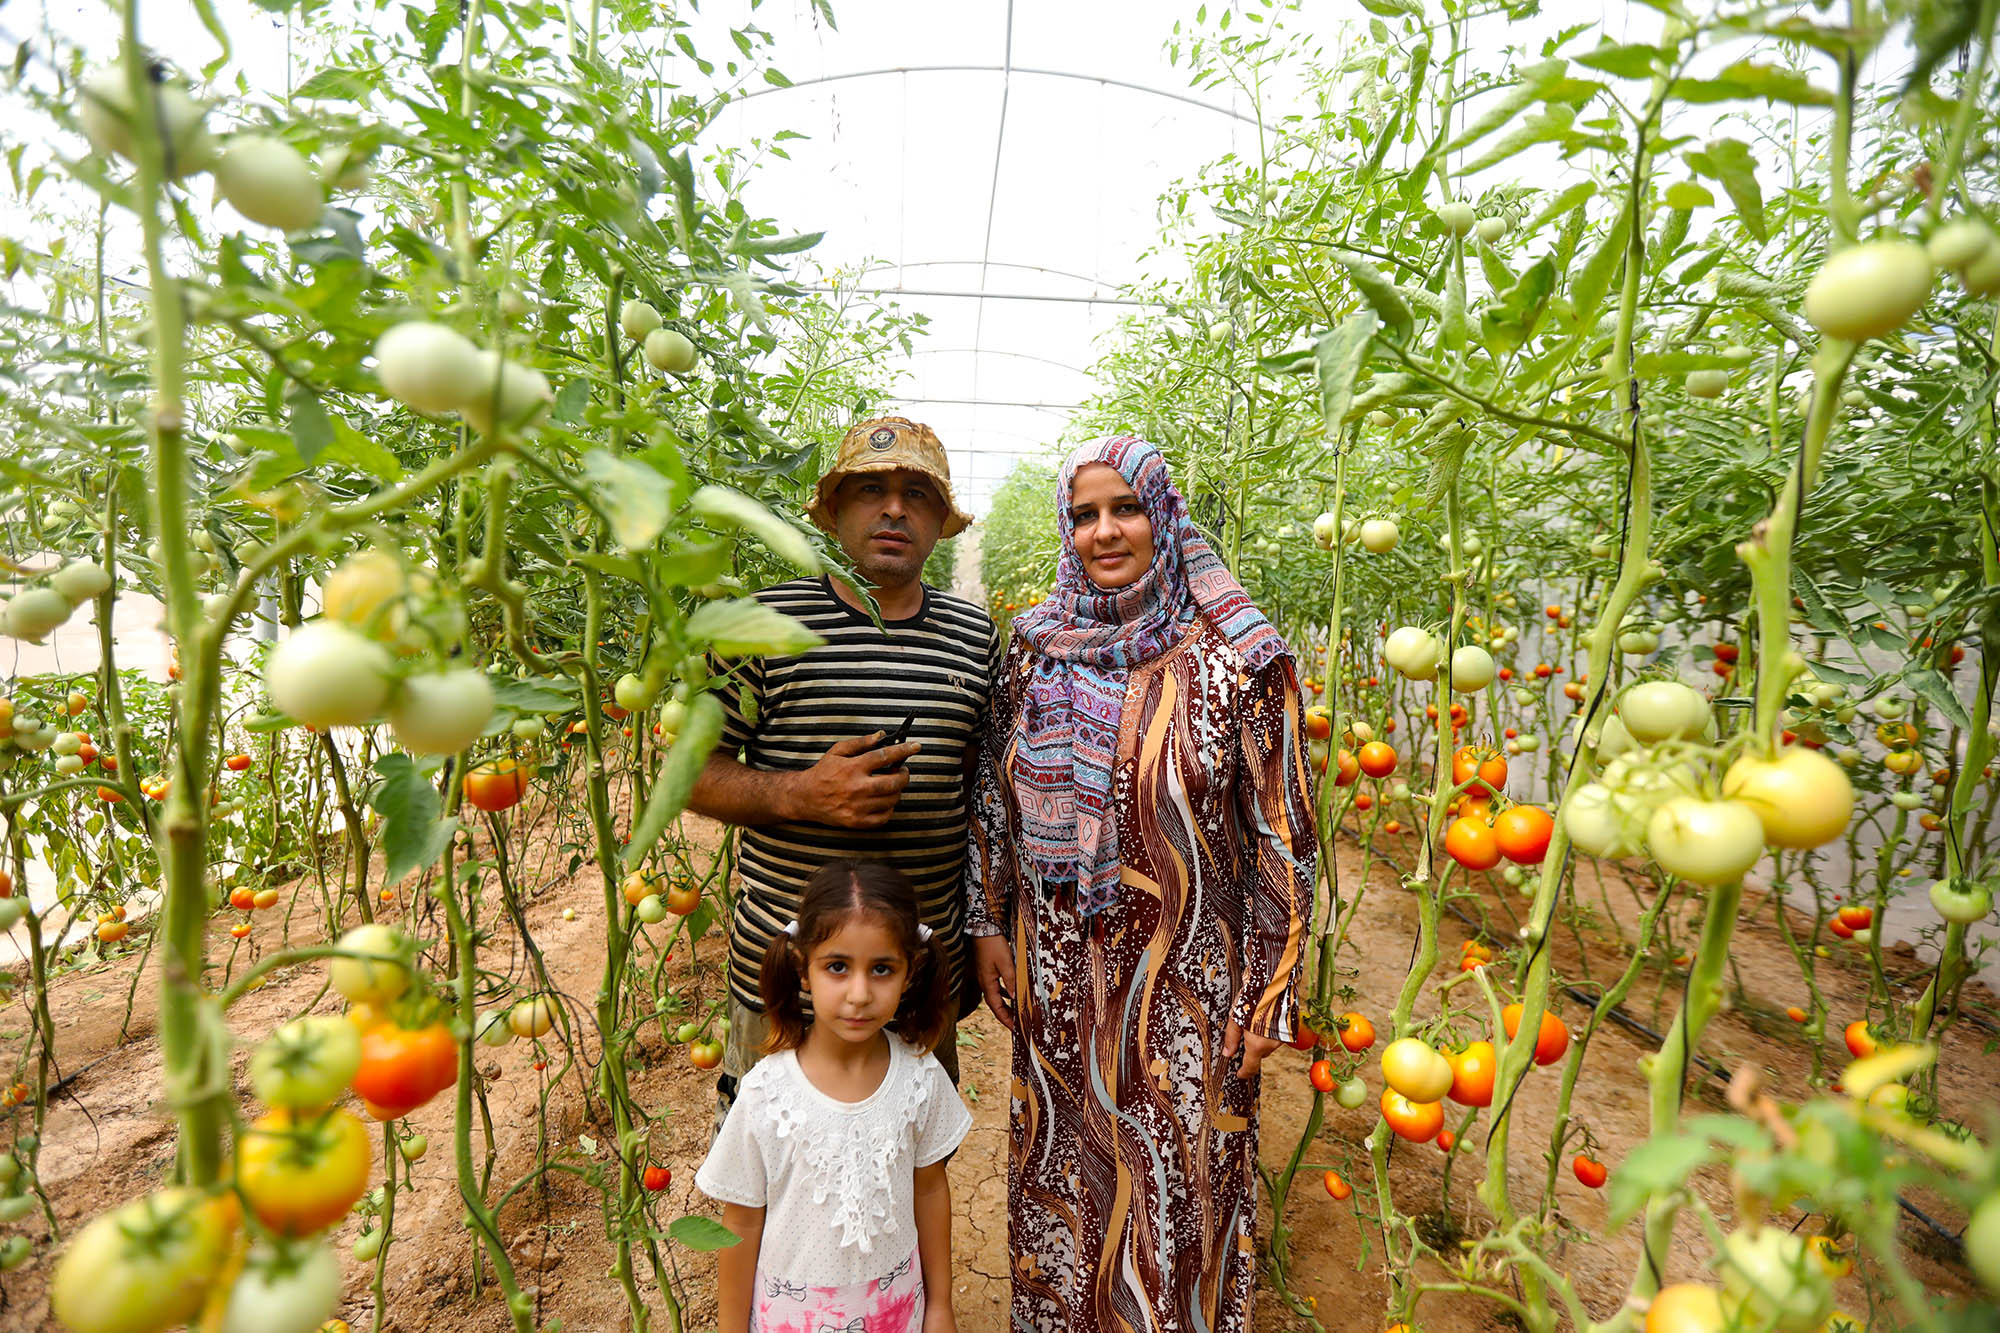 Fadel, Linda and their daughter stand among the tomatoes grown in their Anera-built greenhouse.